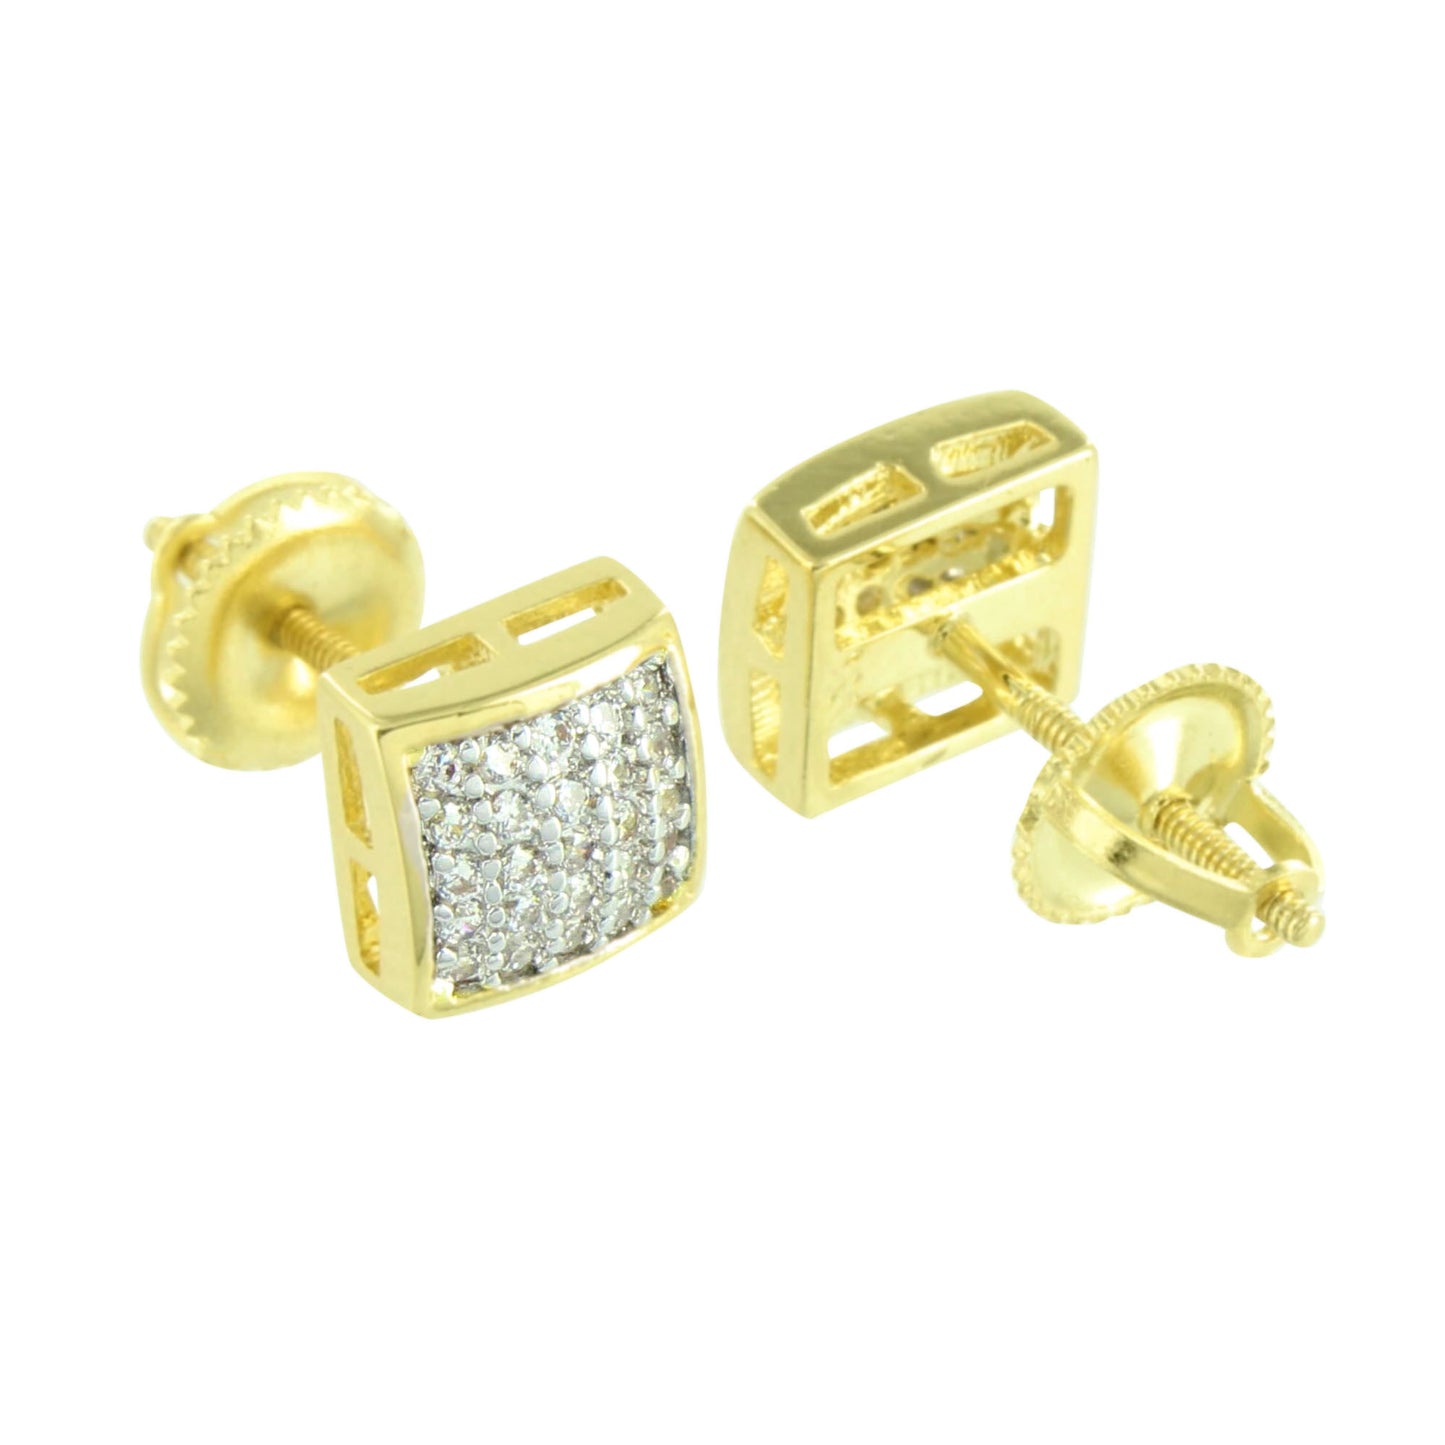 Square Dome Earrings 14K Yellow Gold Finish